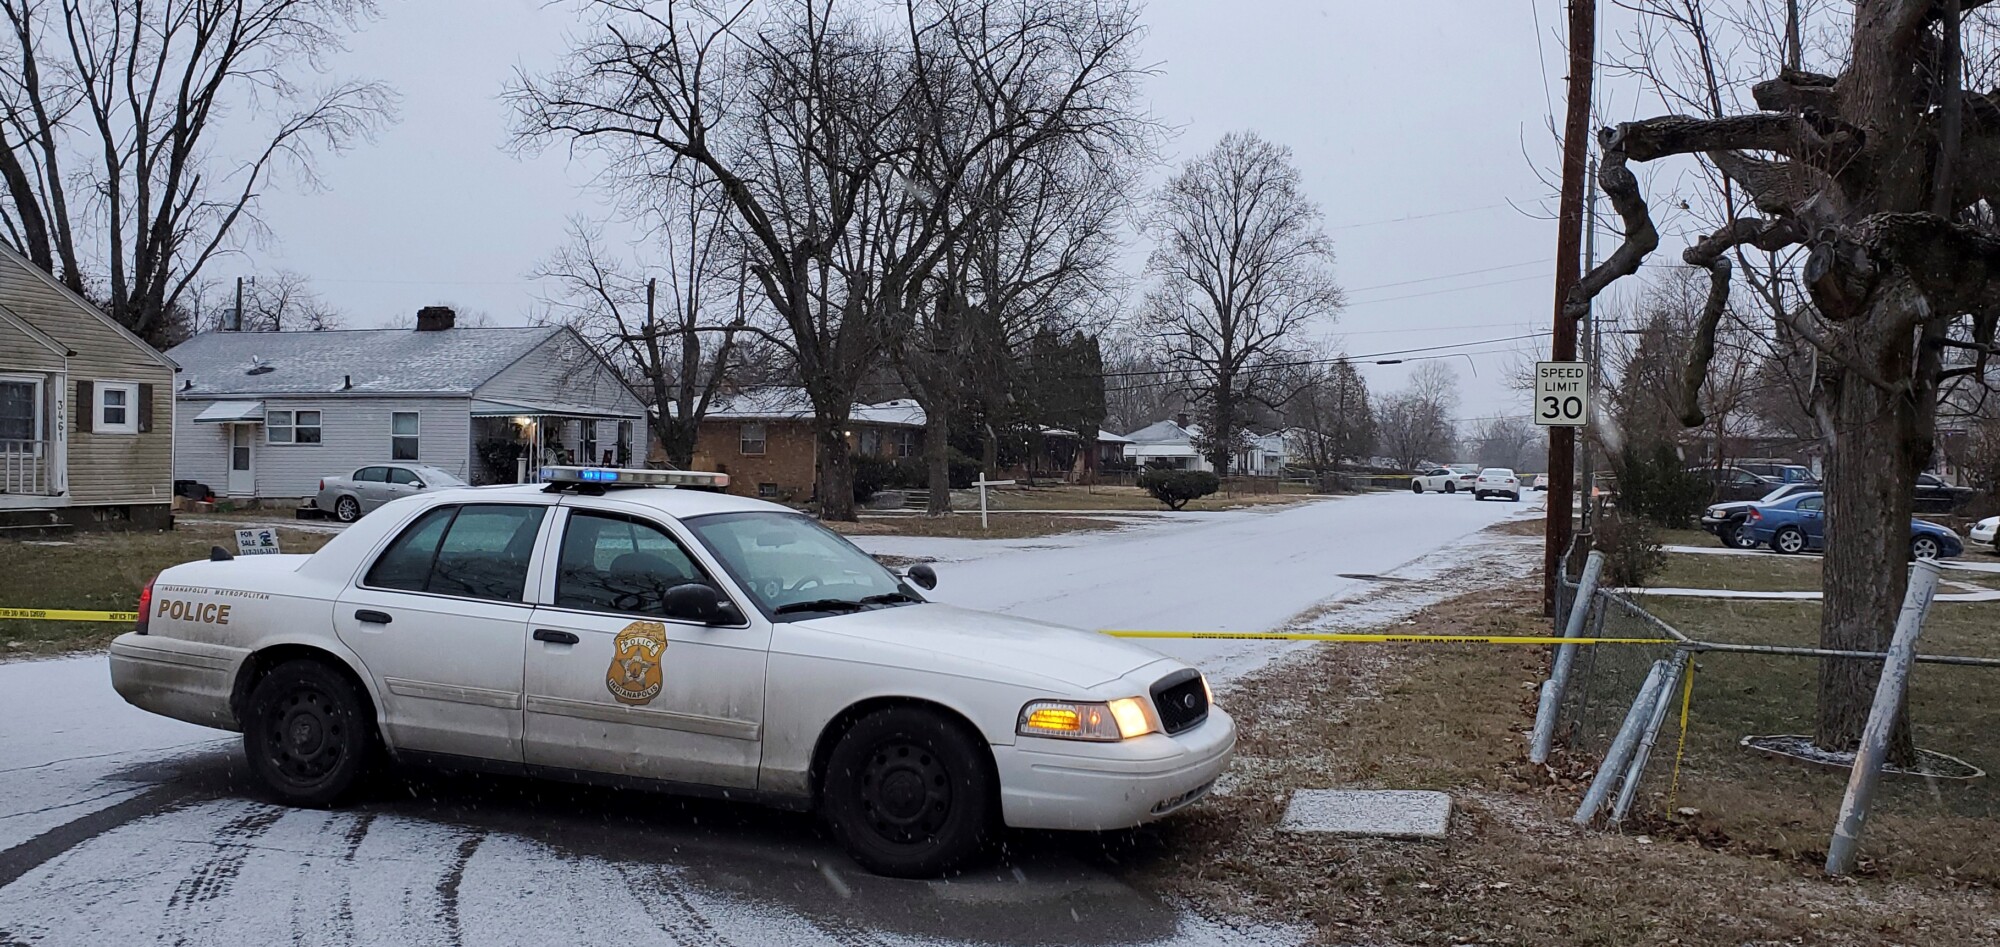 Teen Charged in Fatal Shootings of 5 at Indianapolis Home